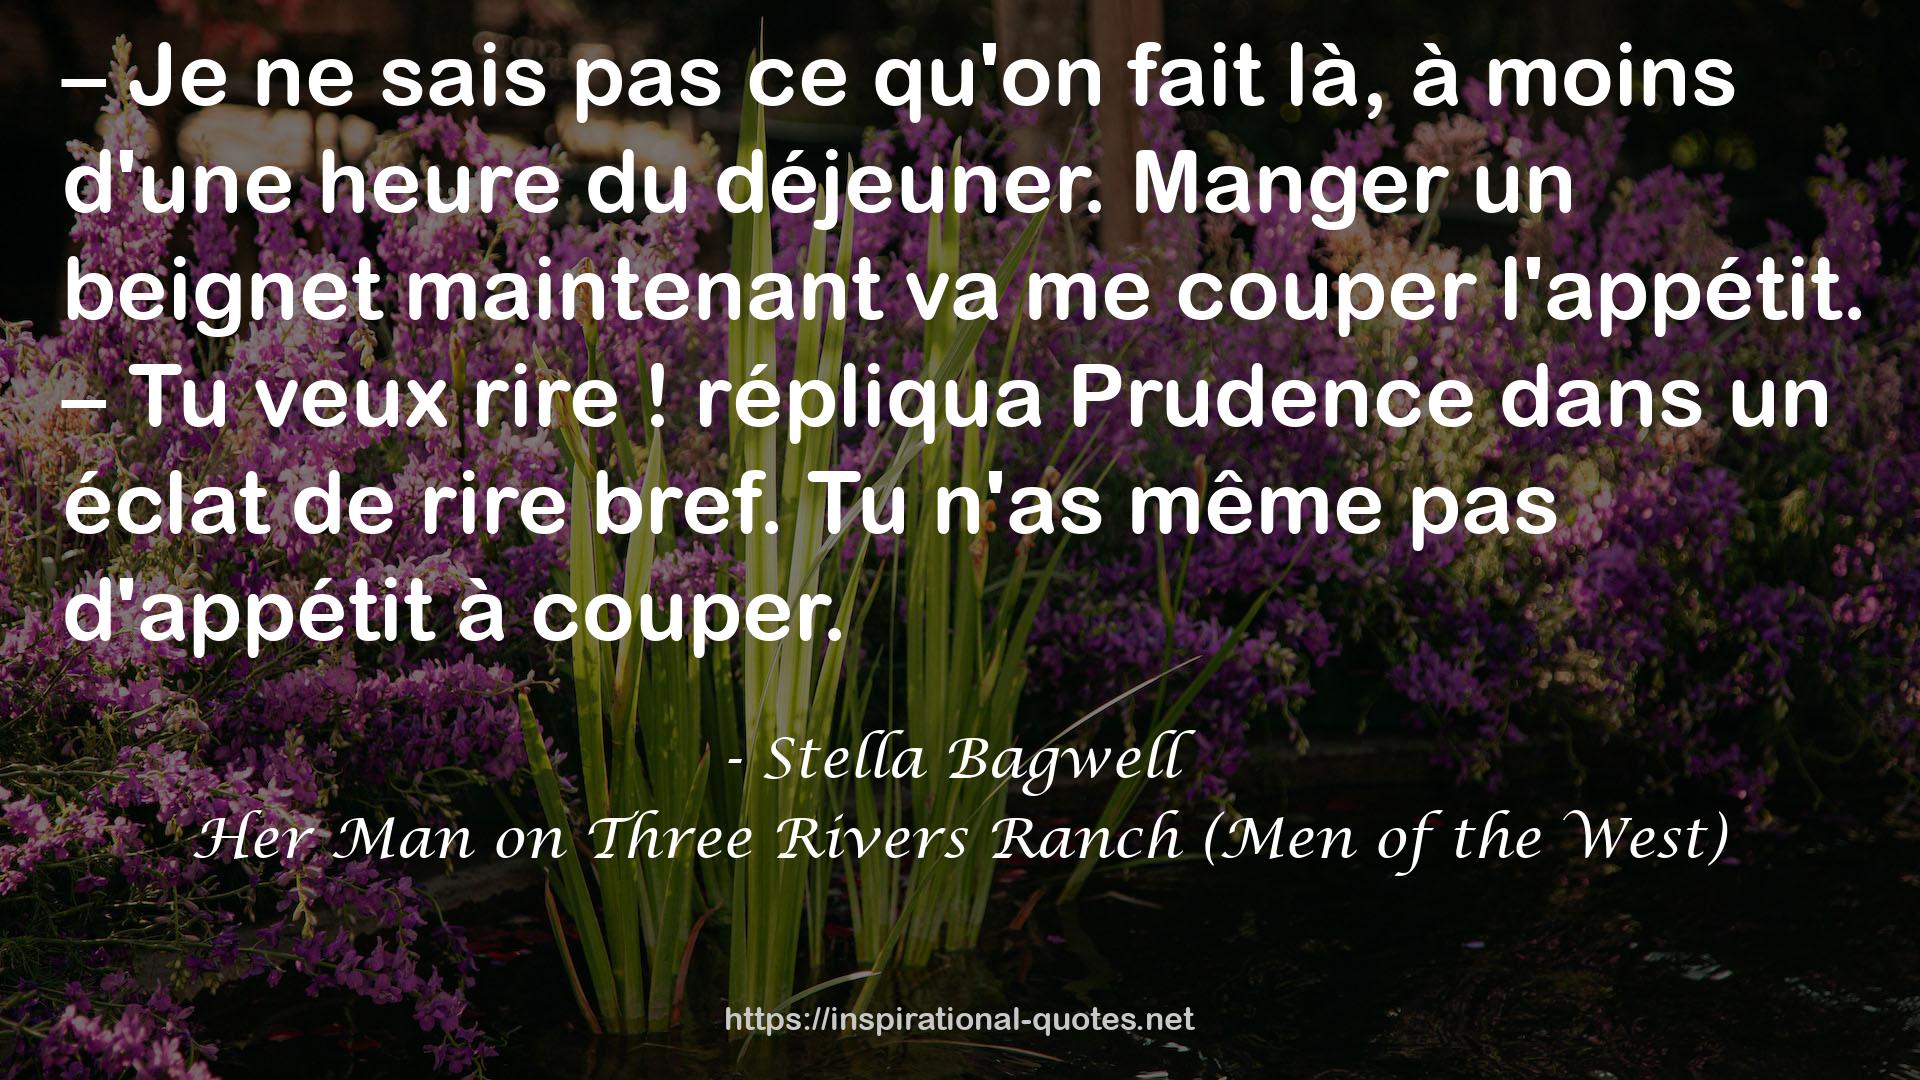 Her Man on Three Rivers Ranch (Men of the West) QUOTES